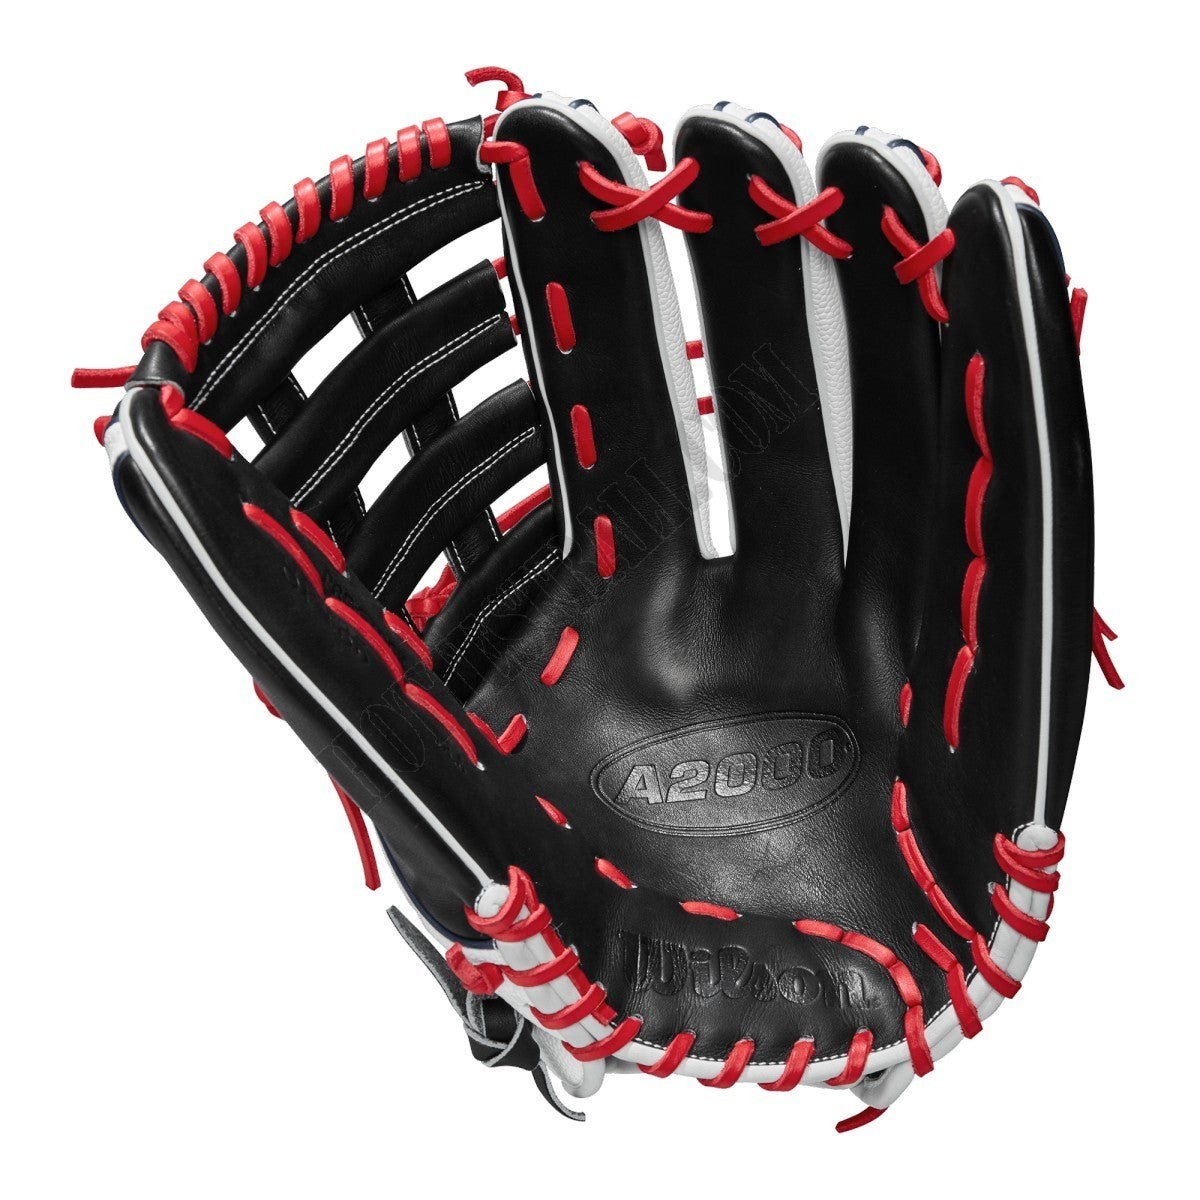 2020 A2000 SP135 13.5" Slowpitch Softball Glove ● Wilson Promotions - -2